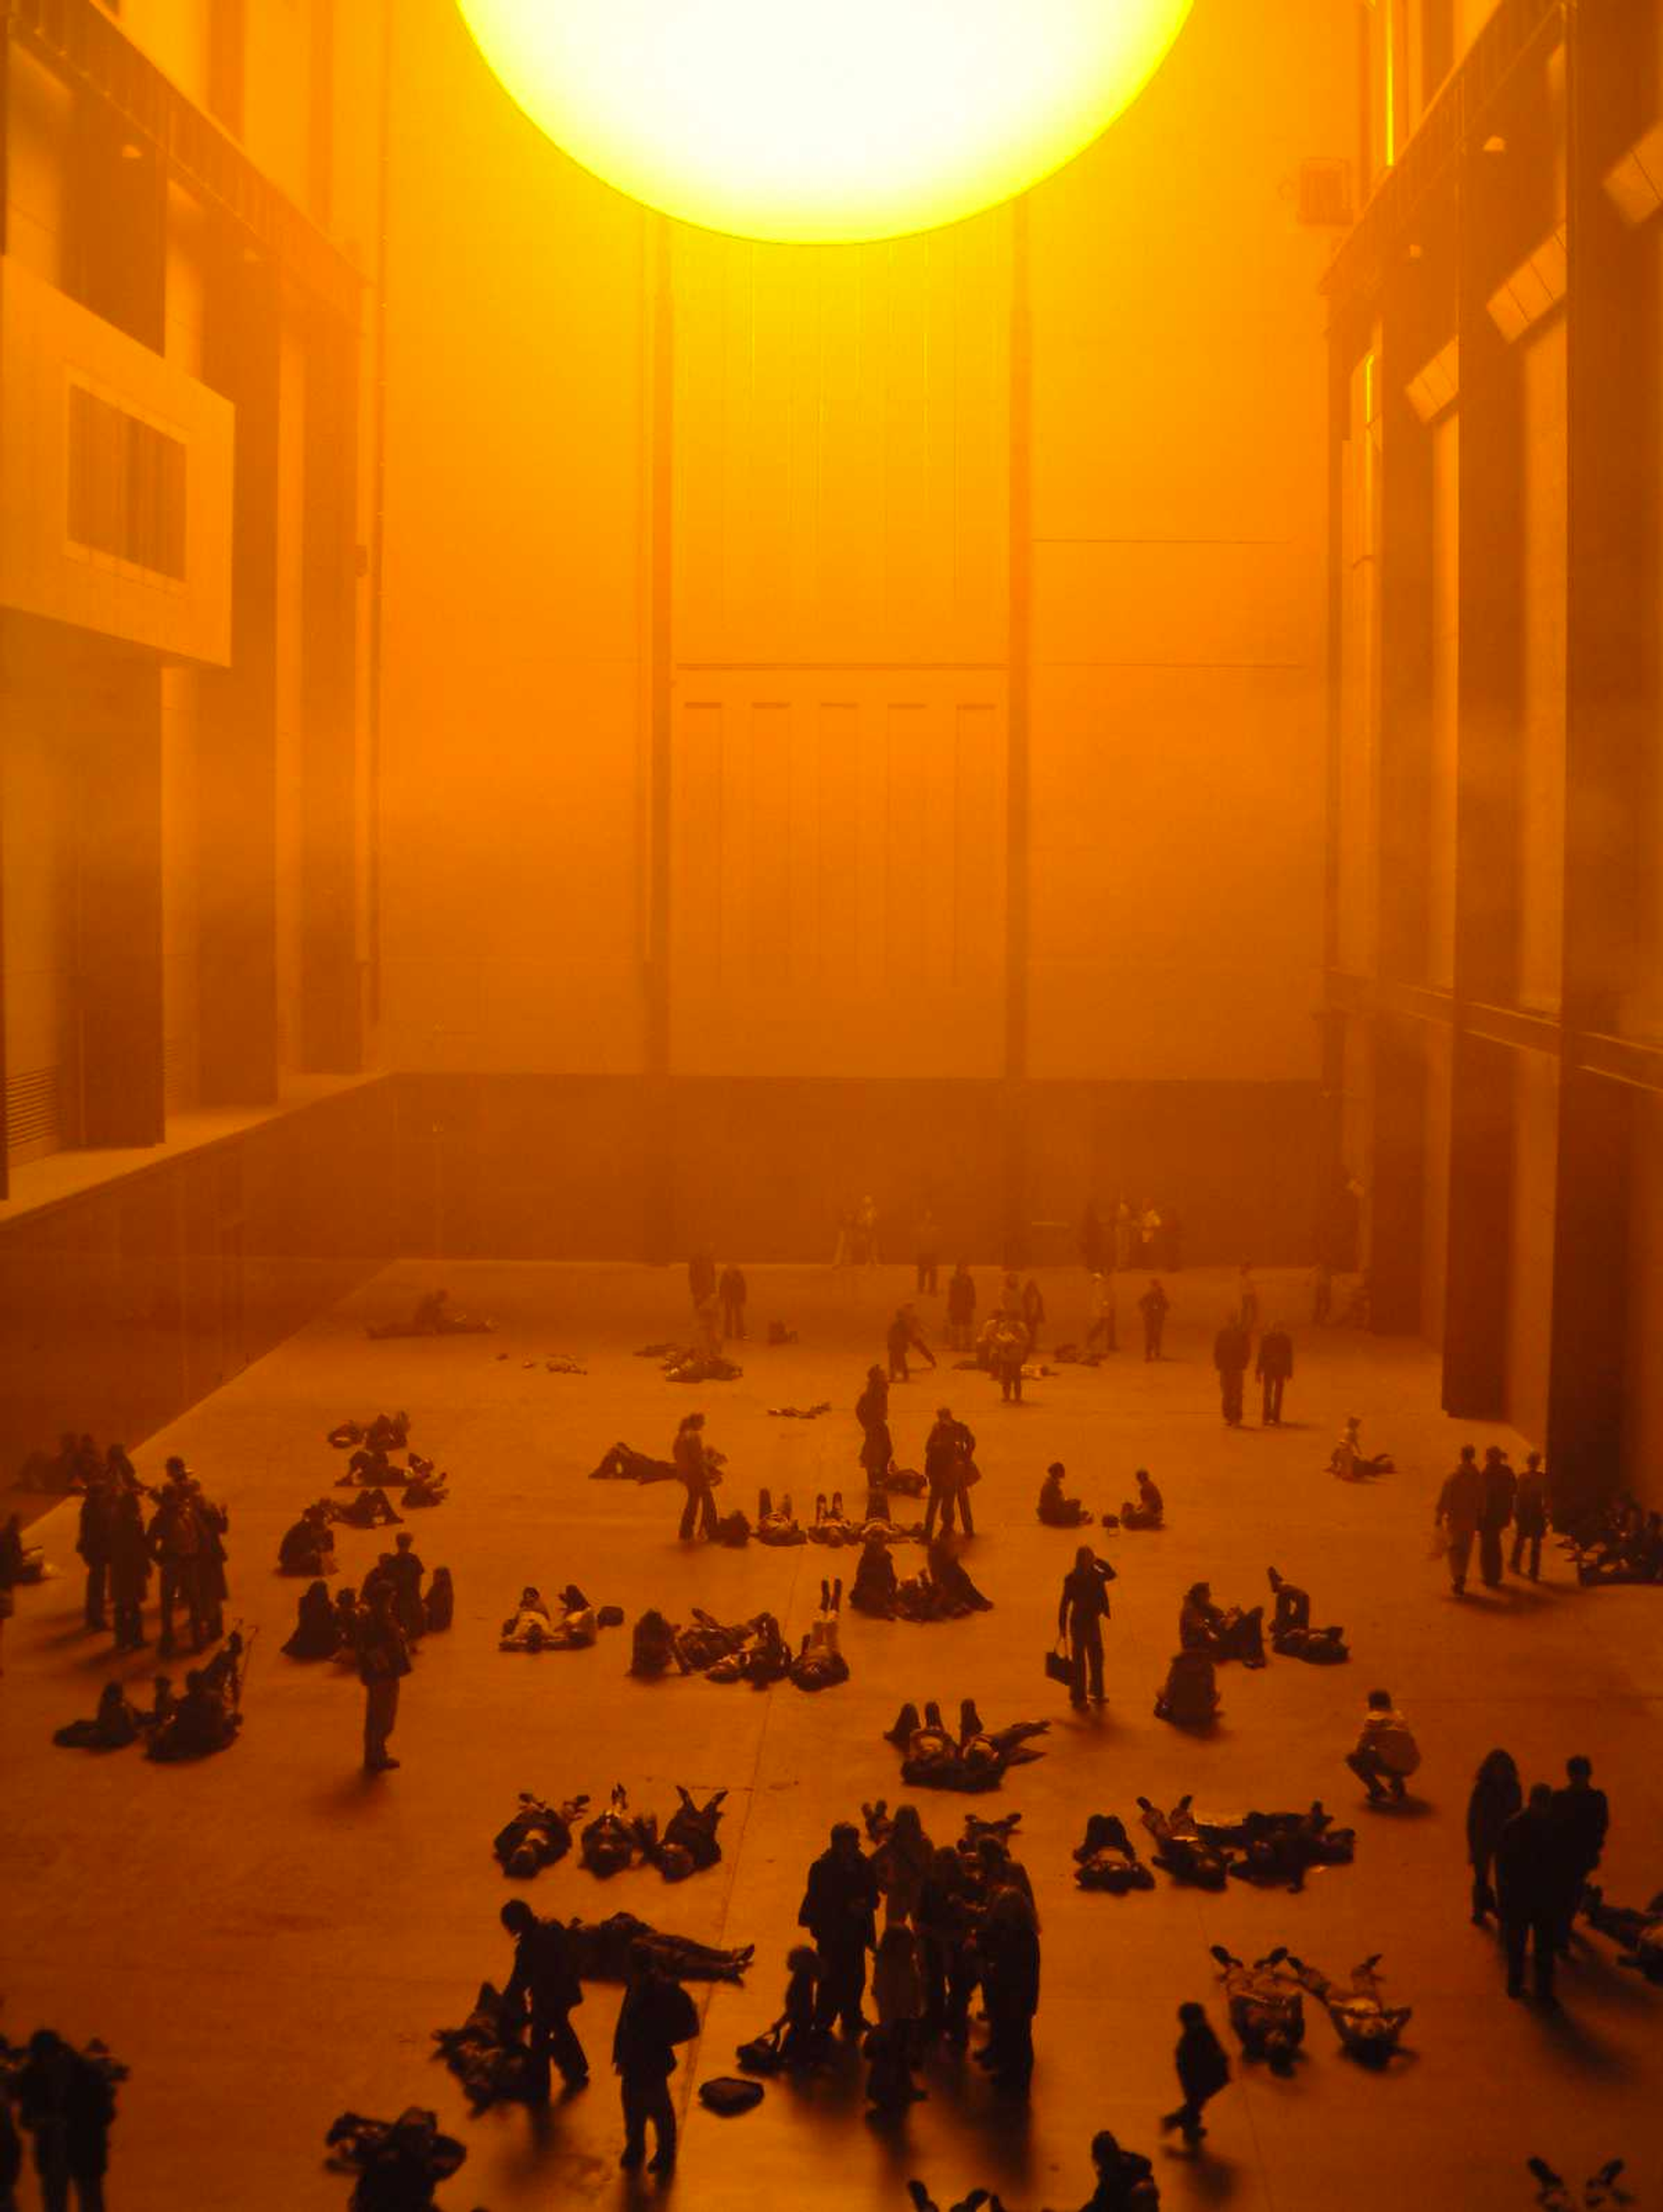 This photograph shows the Tate's Turbine Hall, a large room bathed in a yellow glowing light emanating from a large orb in the ceiling. Several people can be seen standing, sitting or lying down beneath it.